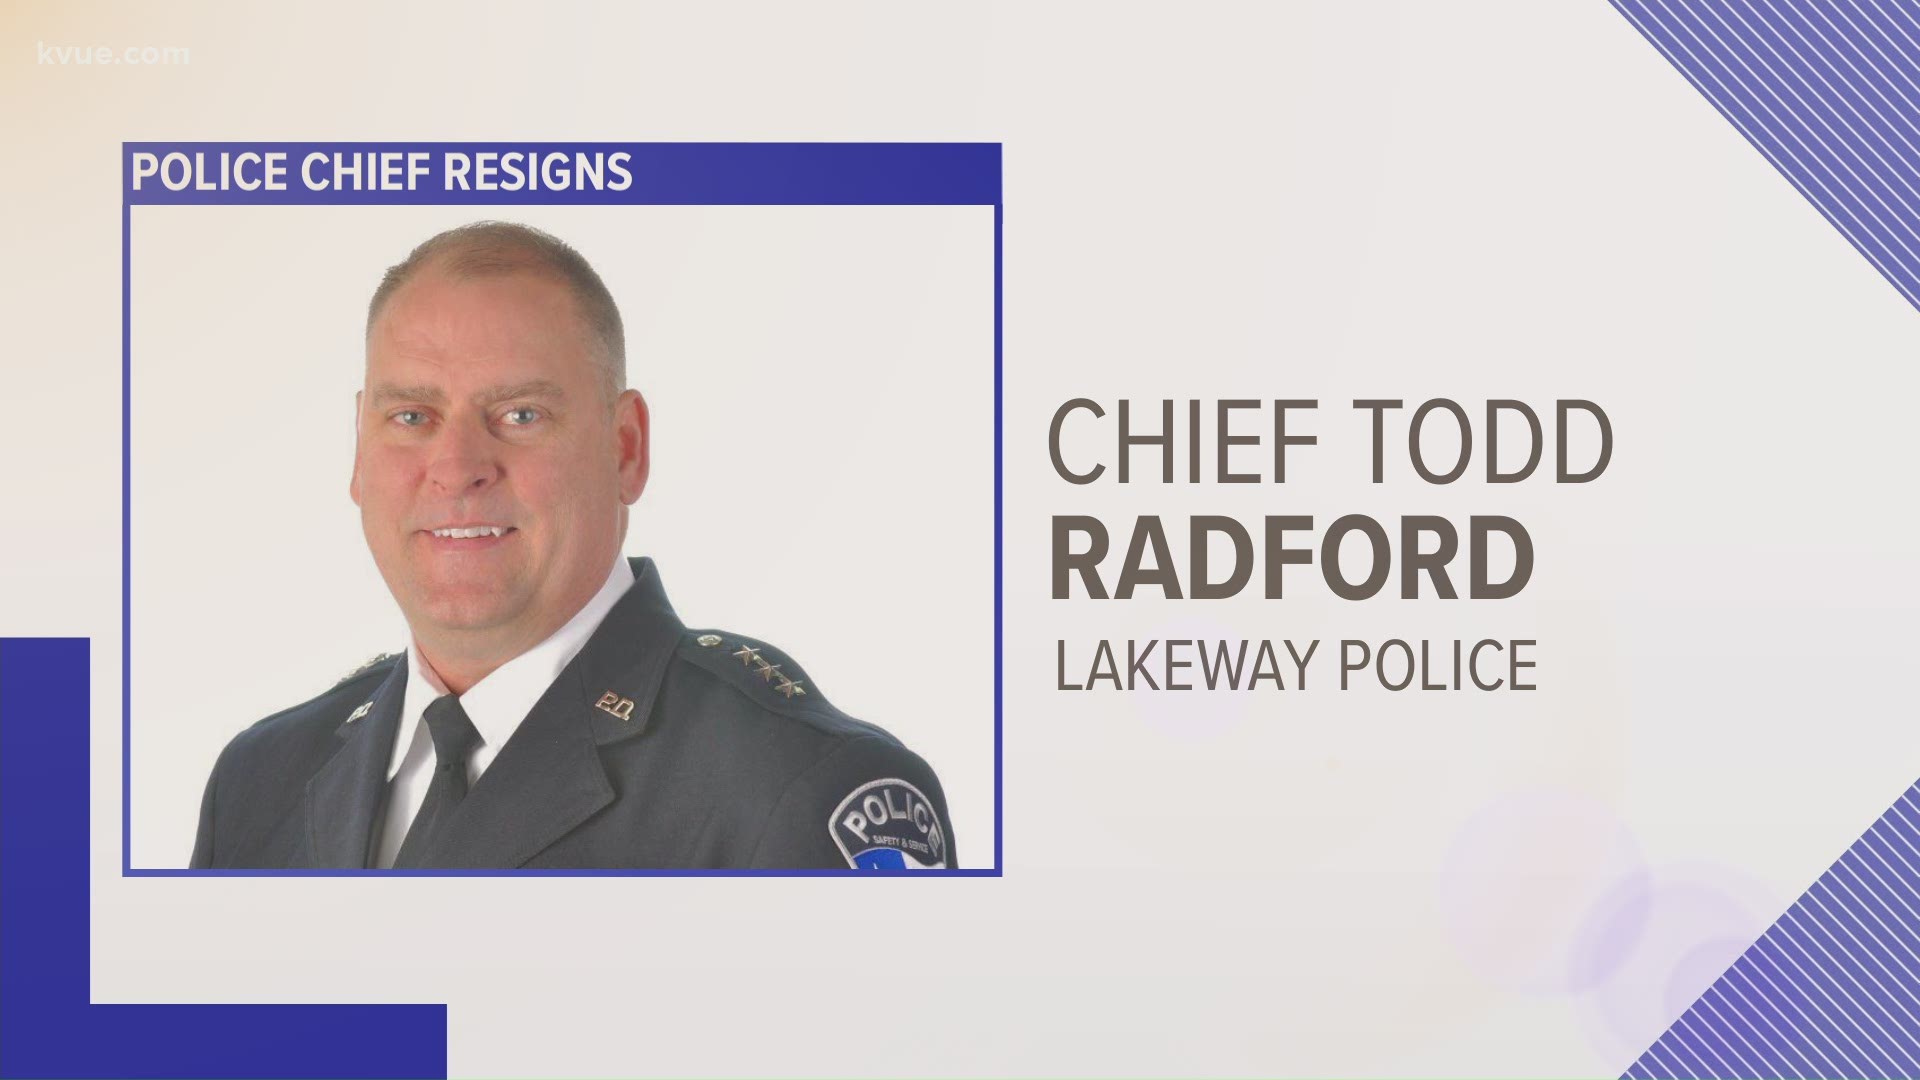 The Lakeway City Council accepted the resignation of Police Chief Todd Radford. Radford had led the police department since 2009.